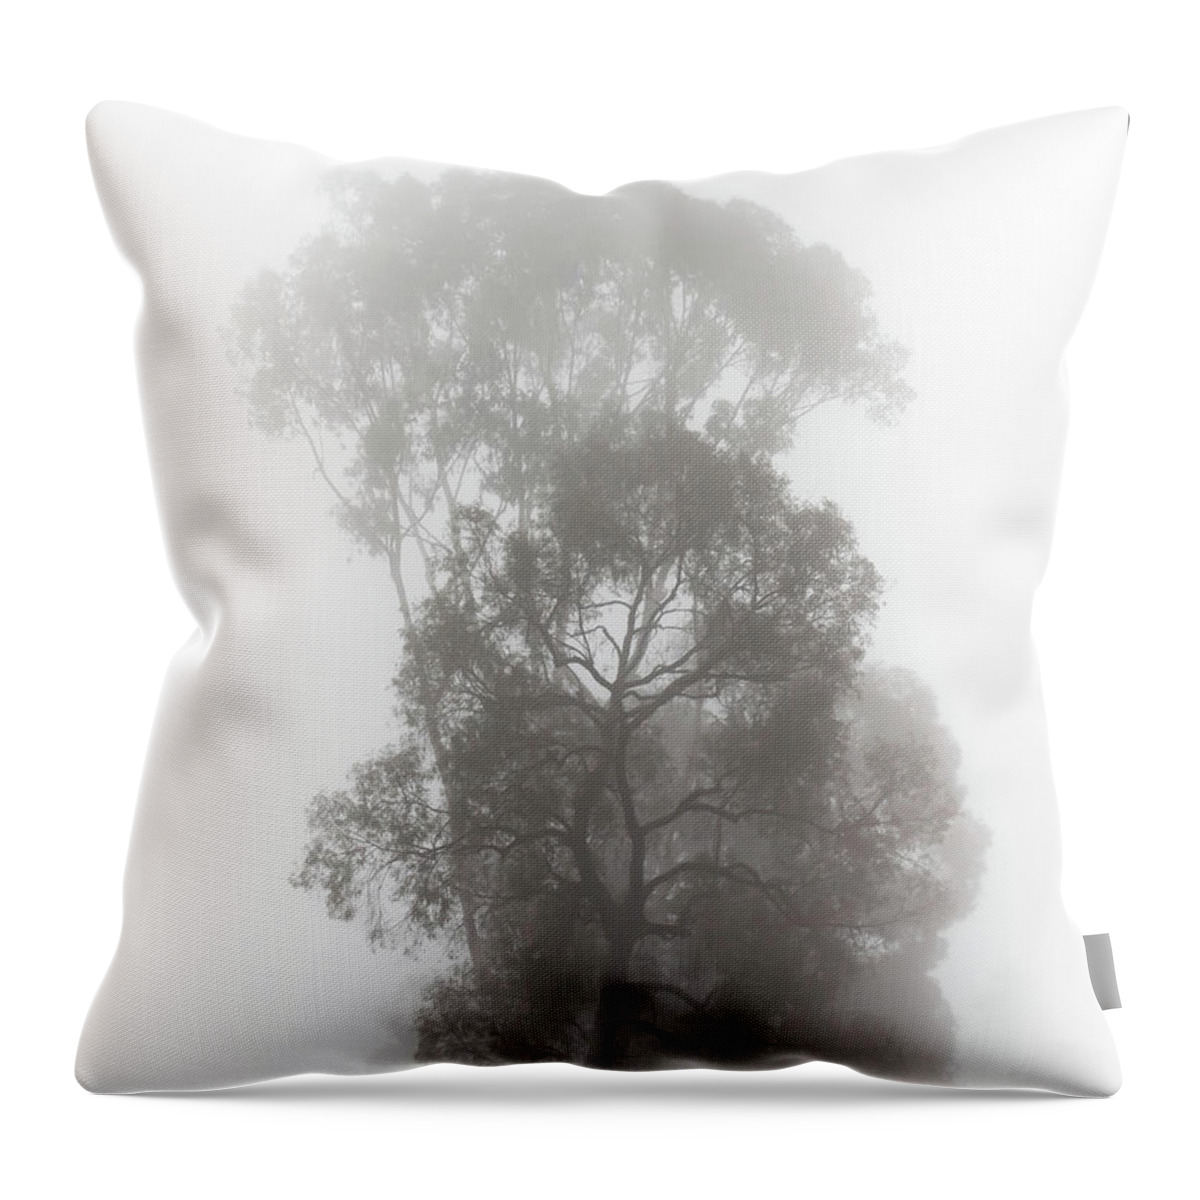 Fog Throw Pillow featuring the photograph Foggy Tree by Alison Frank